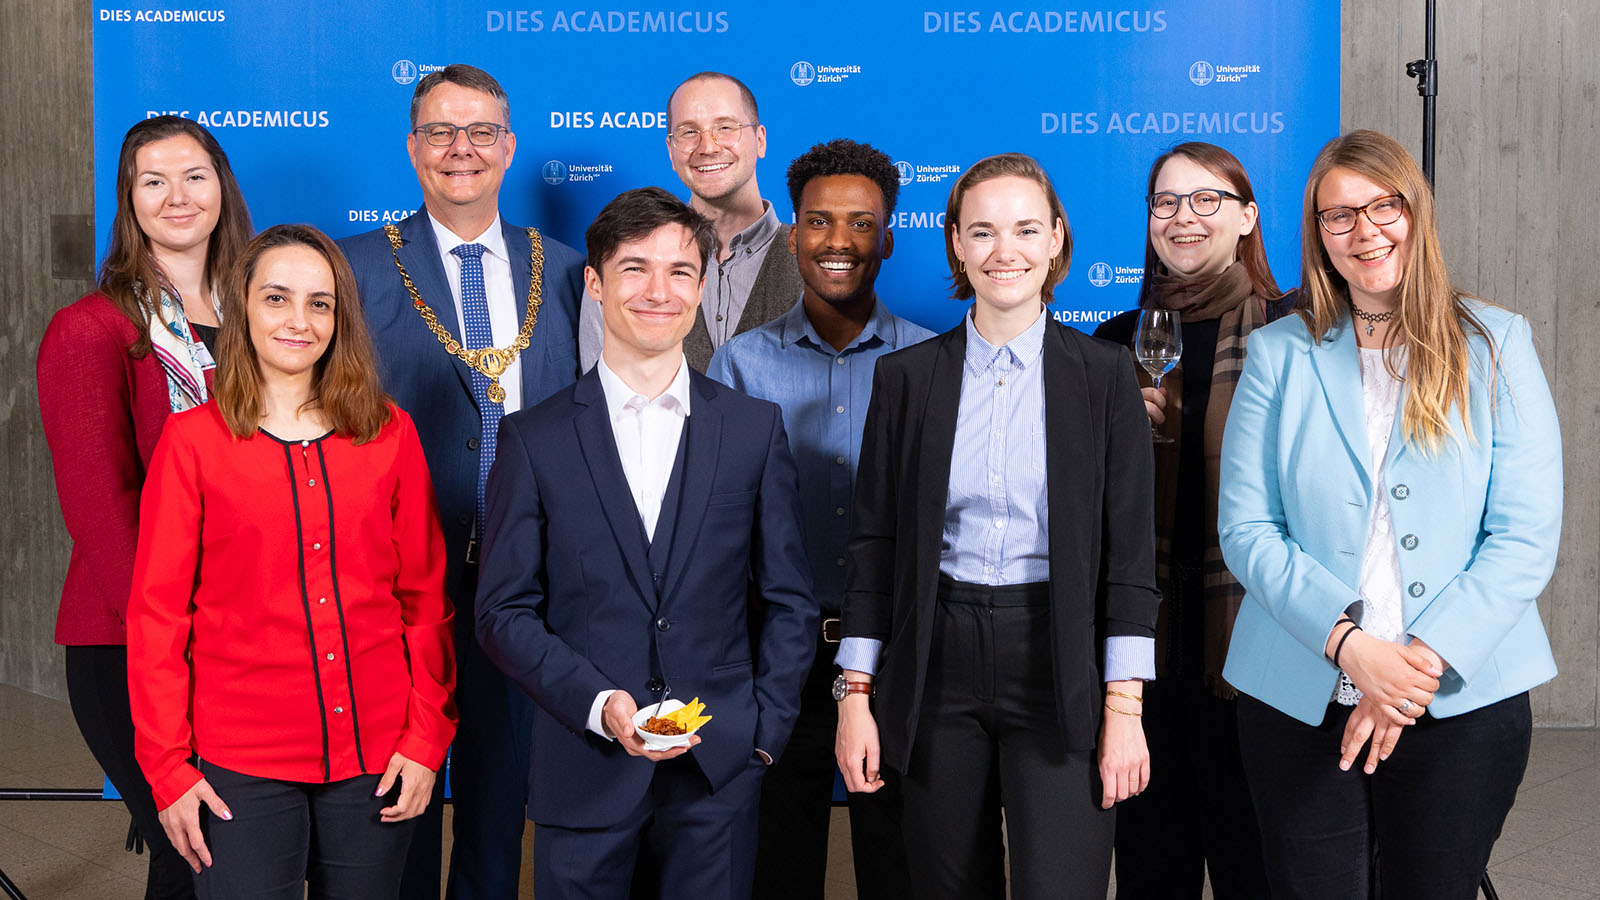 Michael Schaepman with members of the student association of the University of Zurich (VSUZH) at the Dies Academicus, 30 April 2022 (Photo: Frank Brüderli)